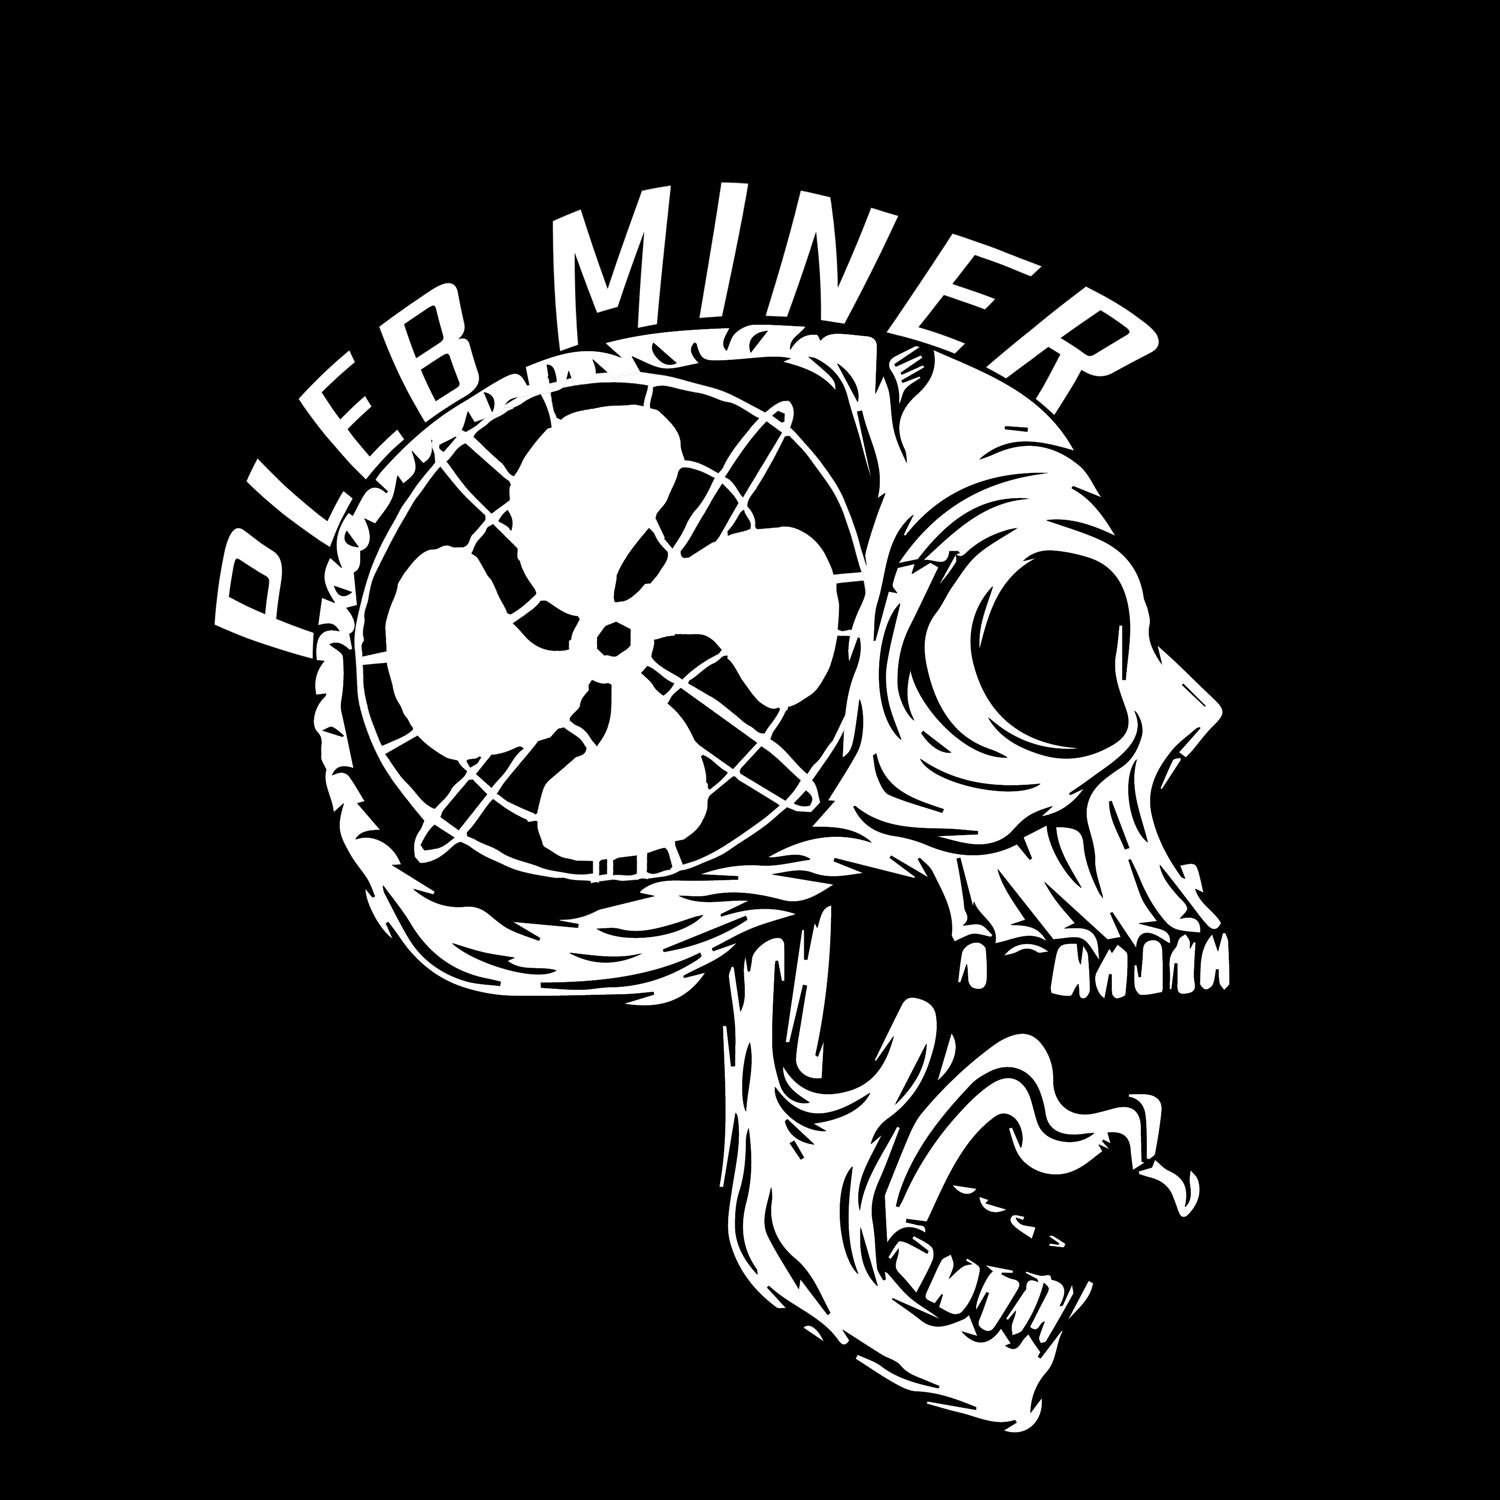 Pleb Miner Monthly EP04 - Bitcoin Minings Statistics, Hash Rate up, Hash value up.